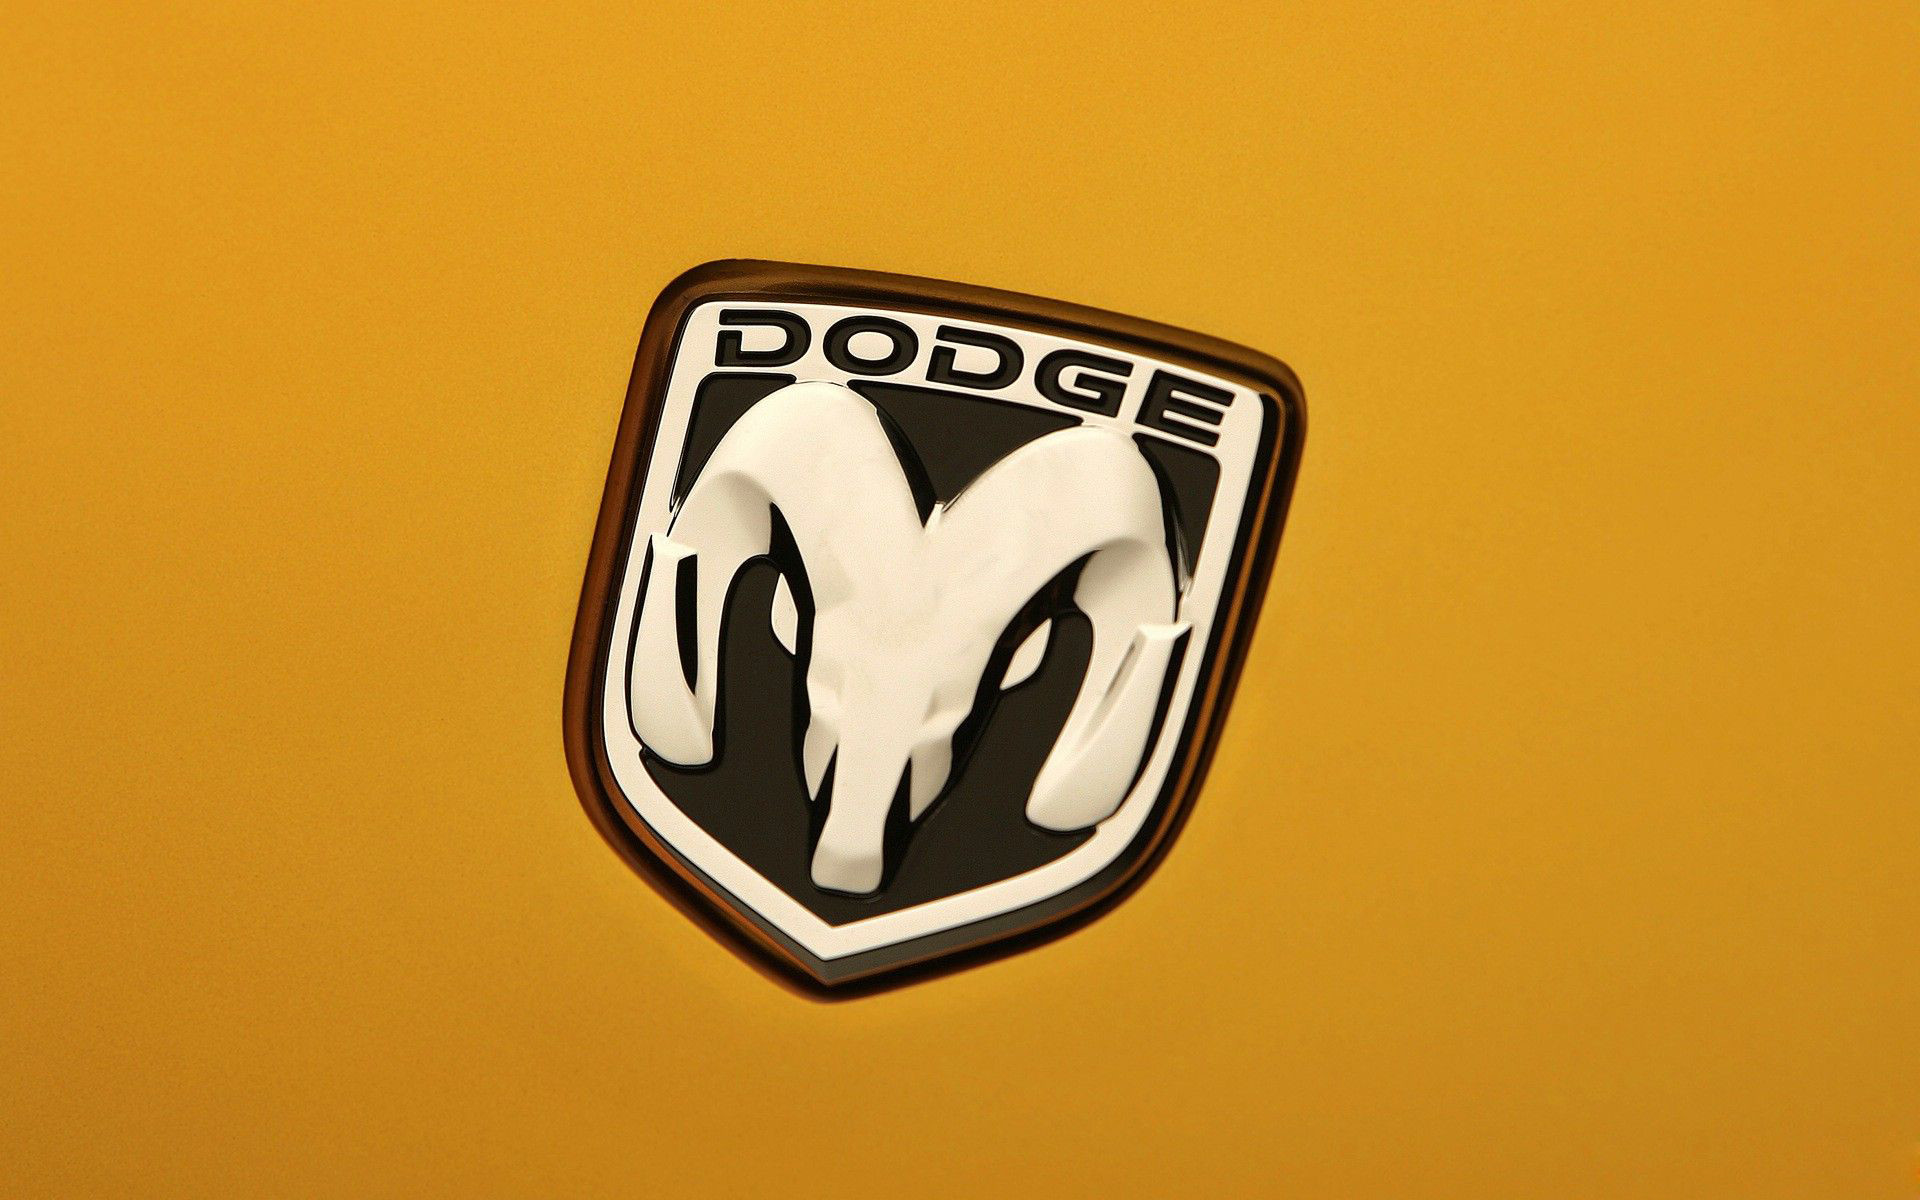 1920x1200 Dodge Logo Wallpapers HD Free Download.